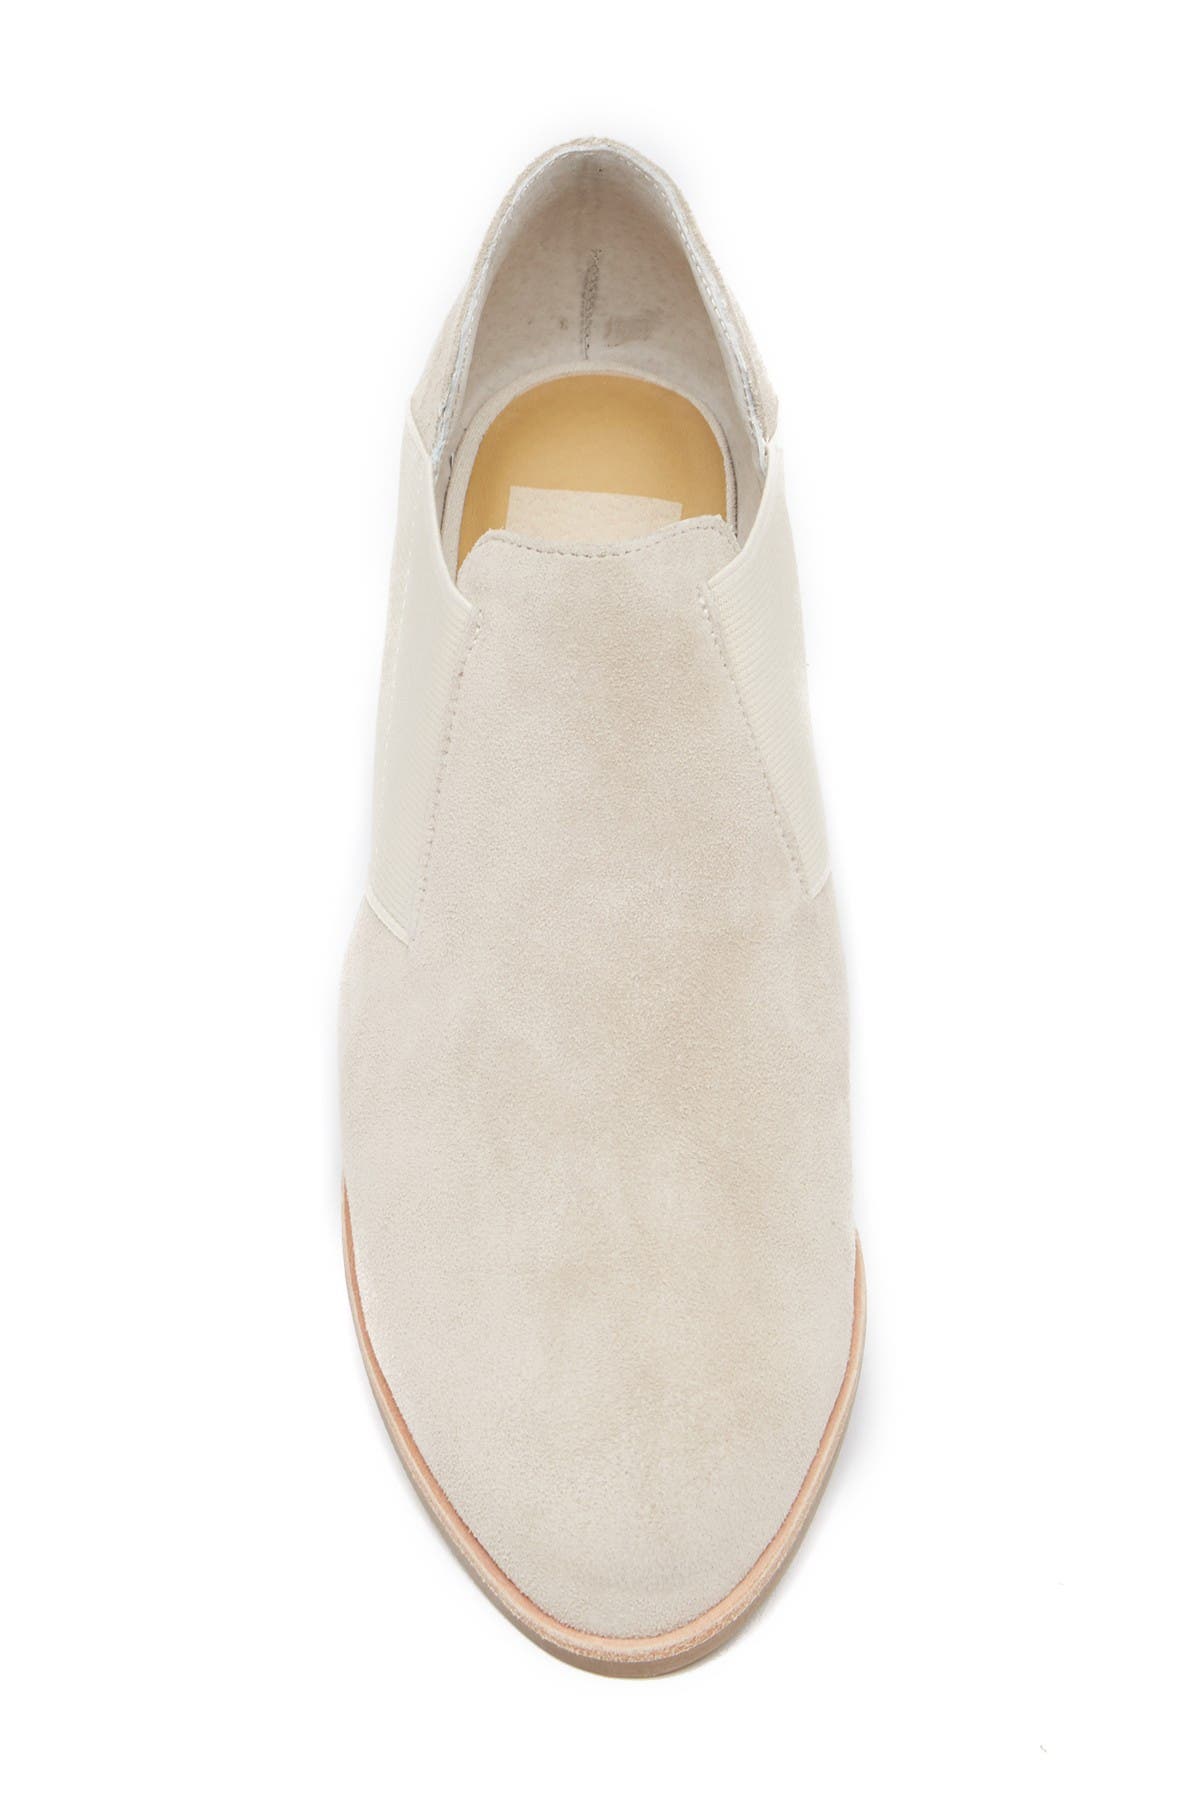 dolce vita caro suede loafers